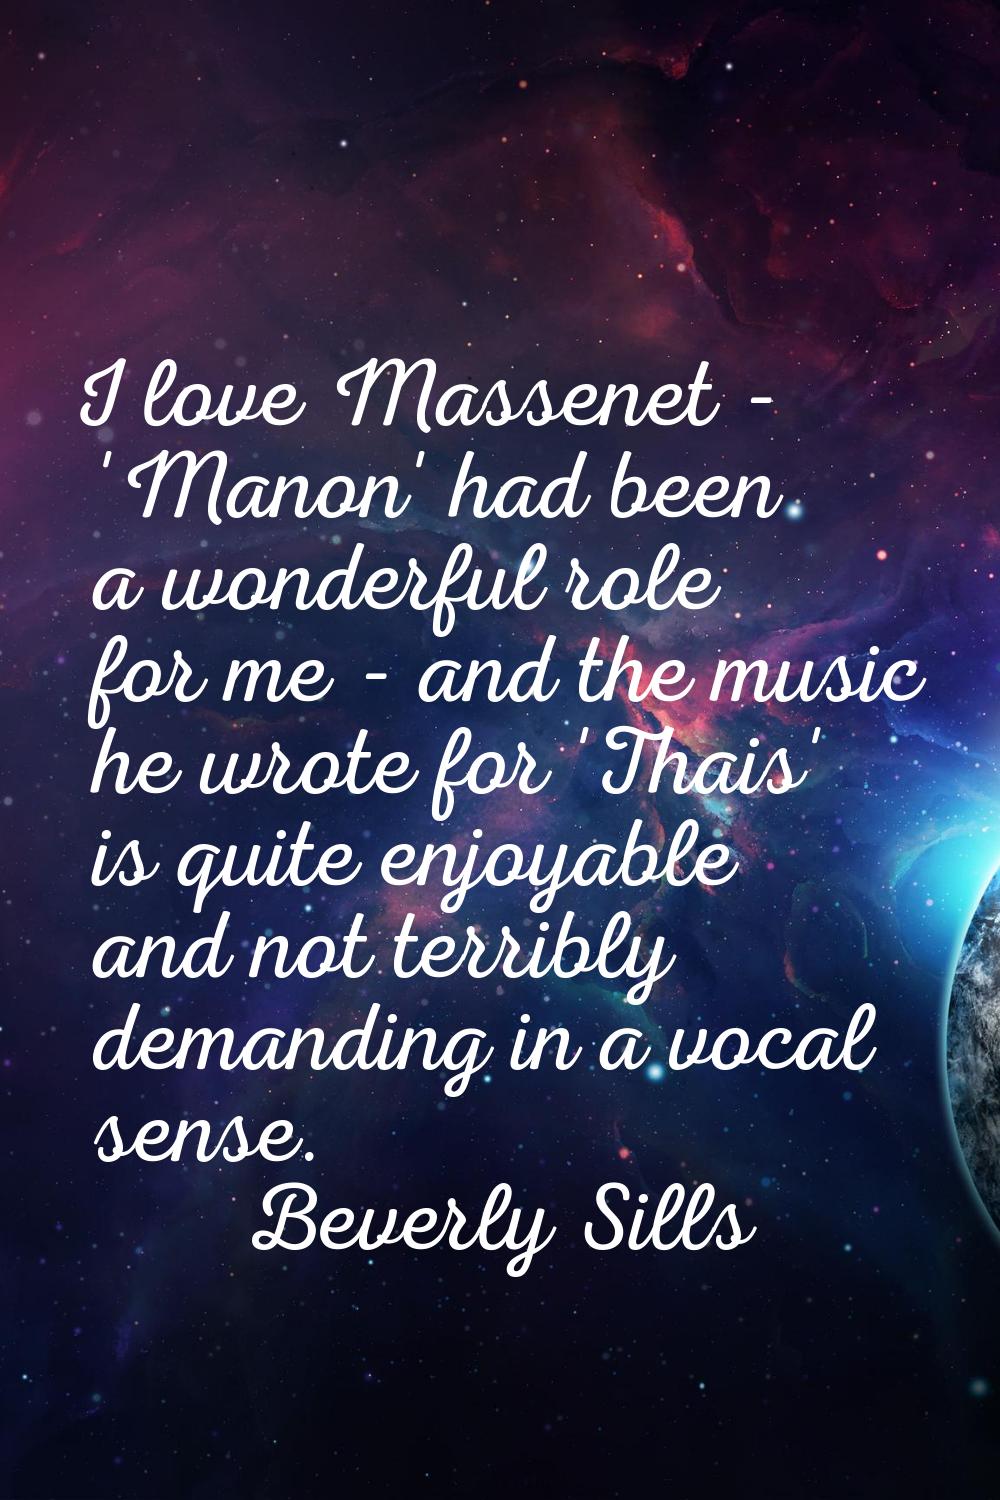 I love Massenet - 'Manon' had been a wonderful role for me - and the music he wrote for 'Thais' is 